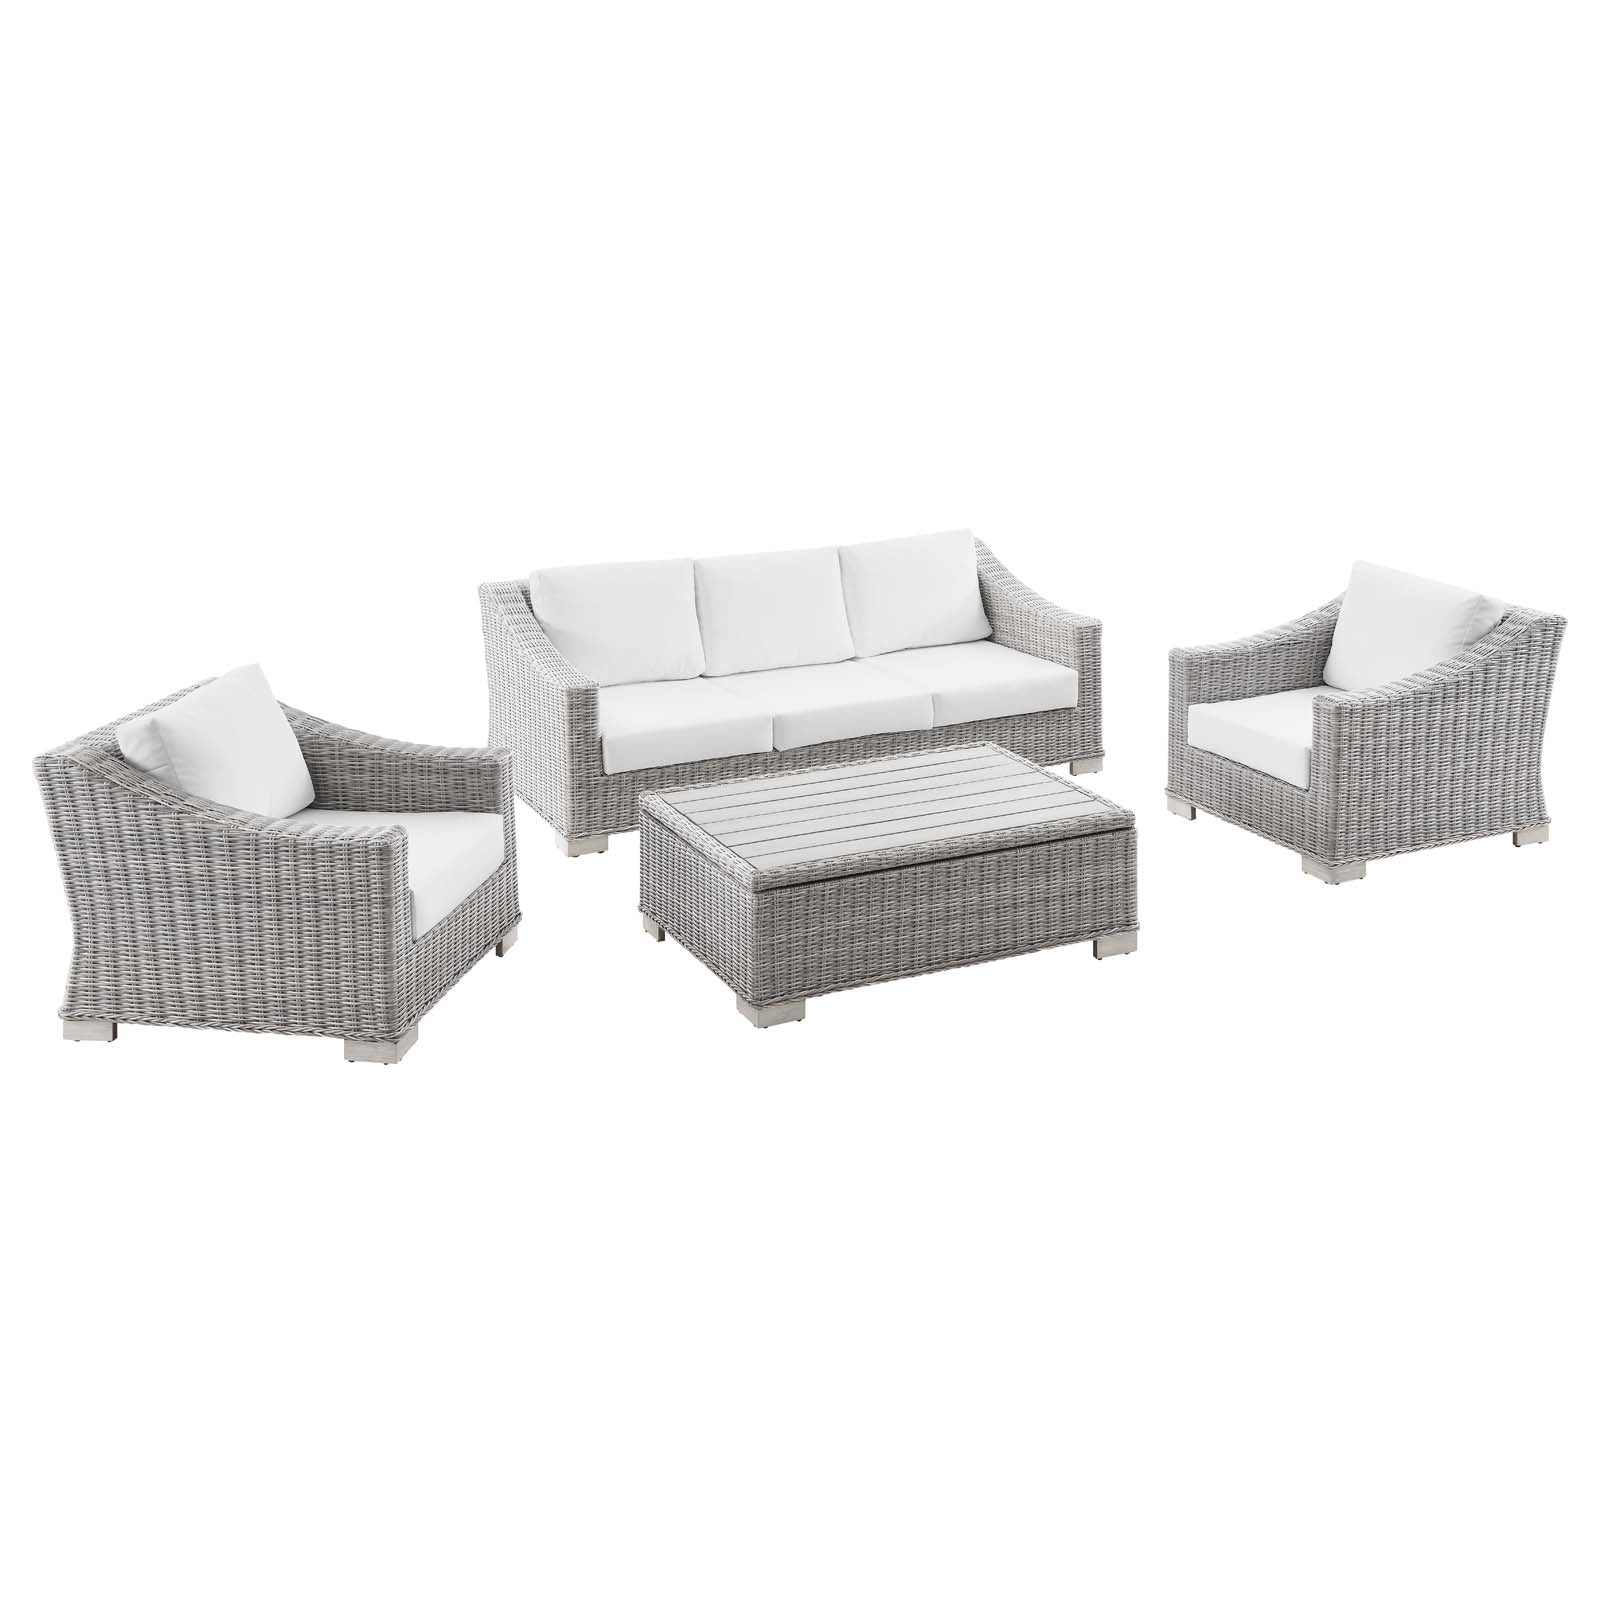 Modway Outdoor Conversation Sets - Conway 4 Piece Outdoor Patio Wicker Rattan Furniture Set Light Gray White